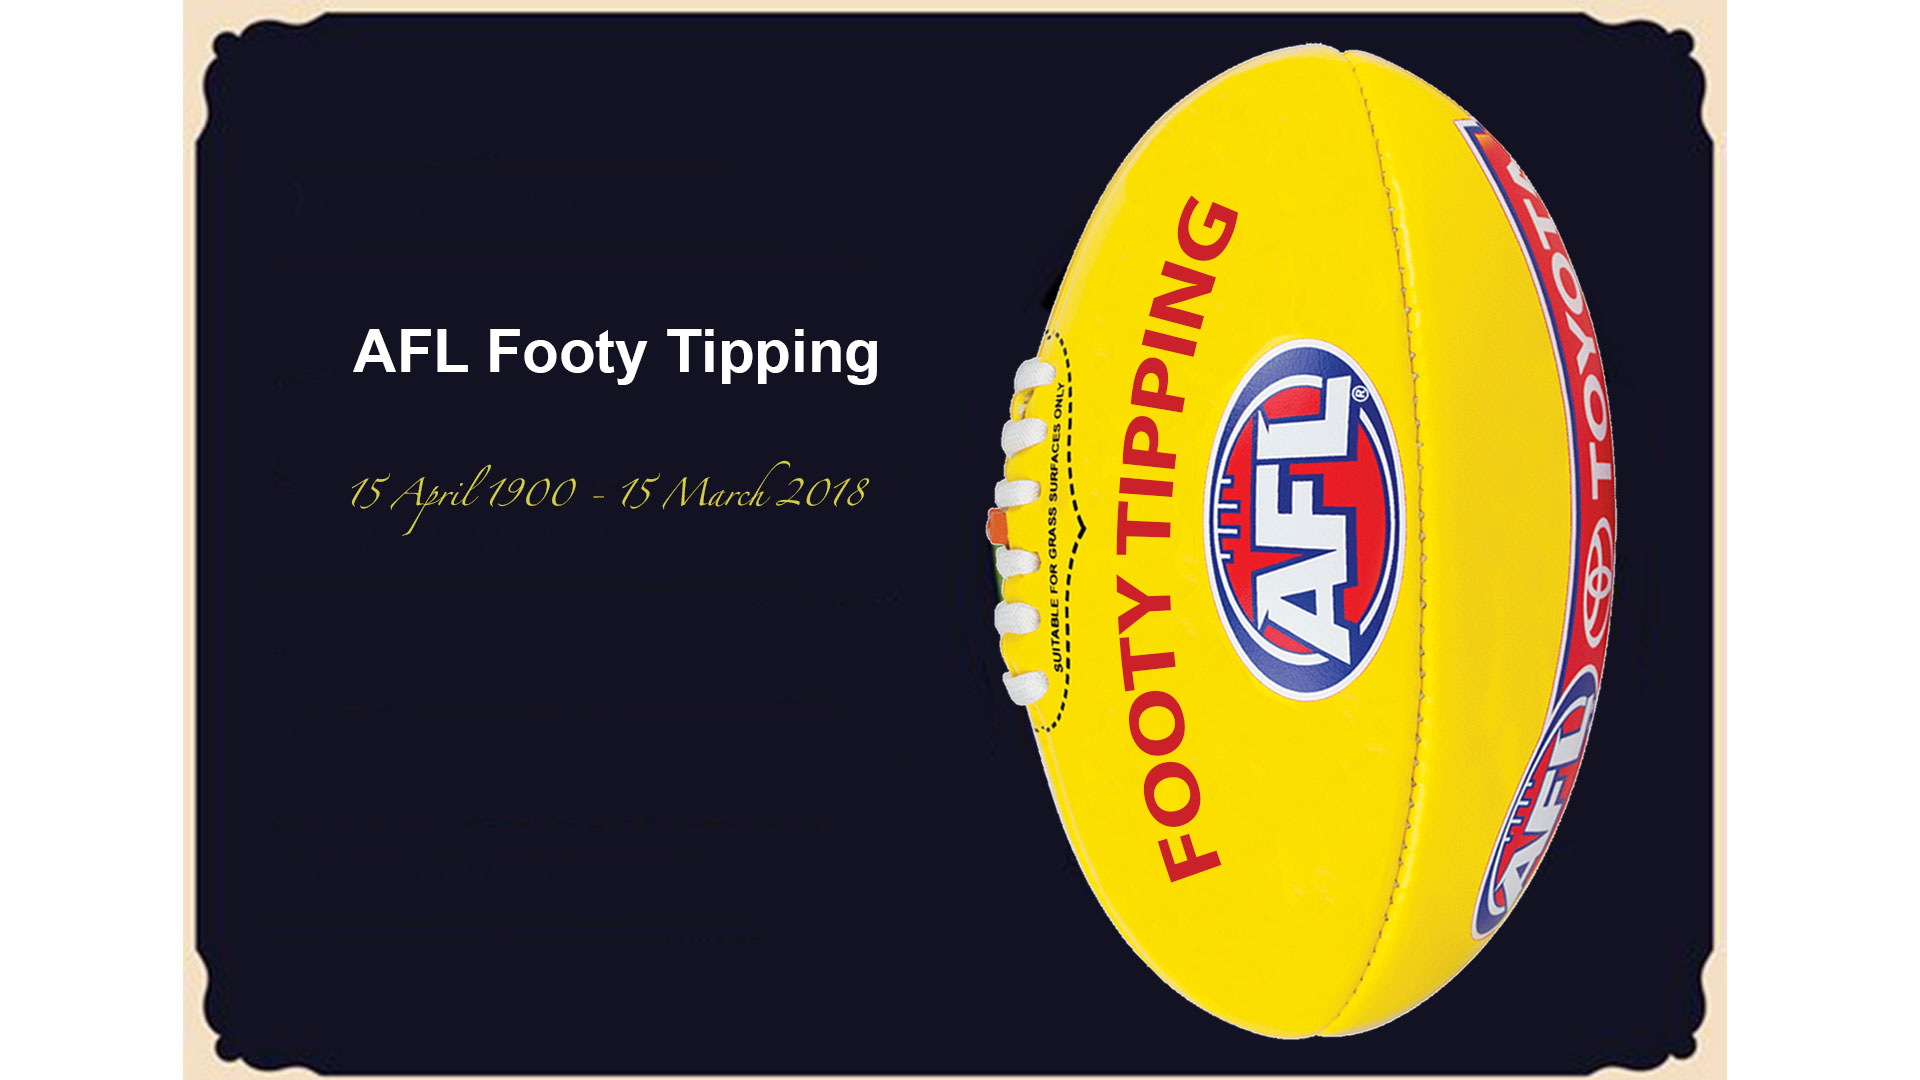 FOOTY TIPPING PRONOUNCED DEAD, 15th March 2018.